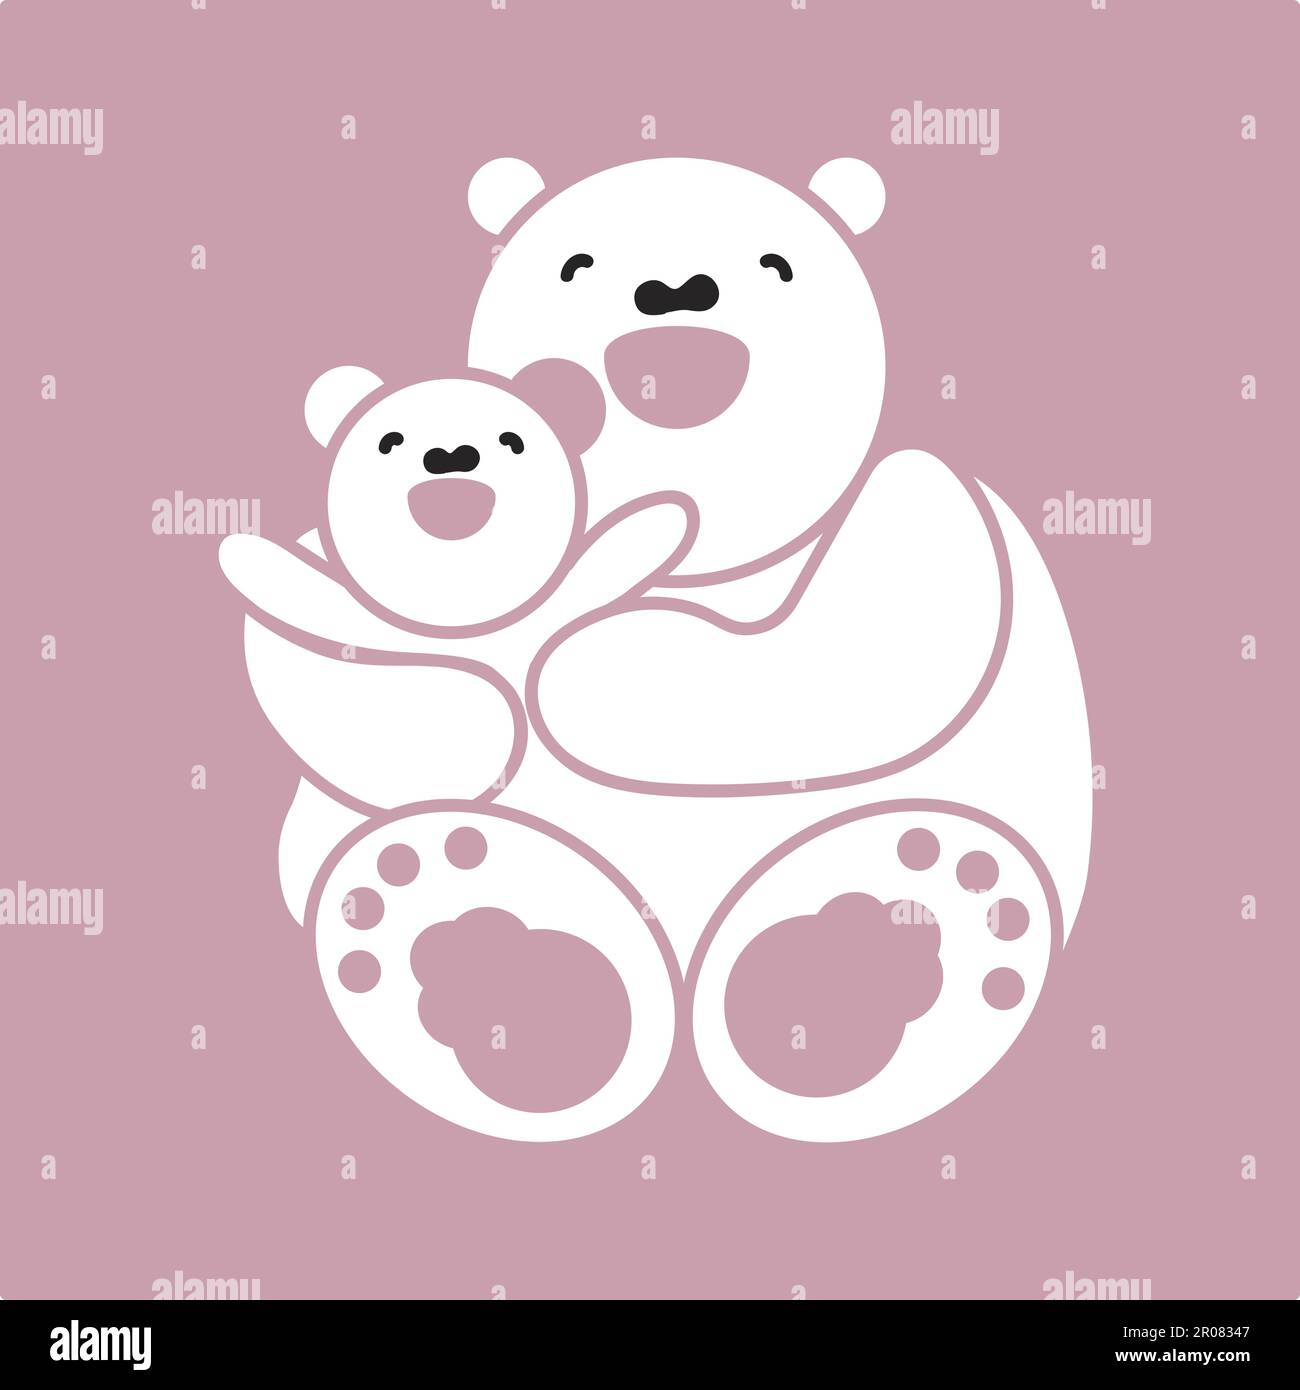 https://c8.alamy.com/comp/2R08347/sticker-card-with-happy-mother-and-child-white-bear-vector-2R08347.jpg